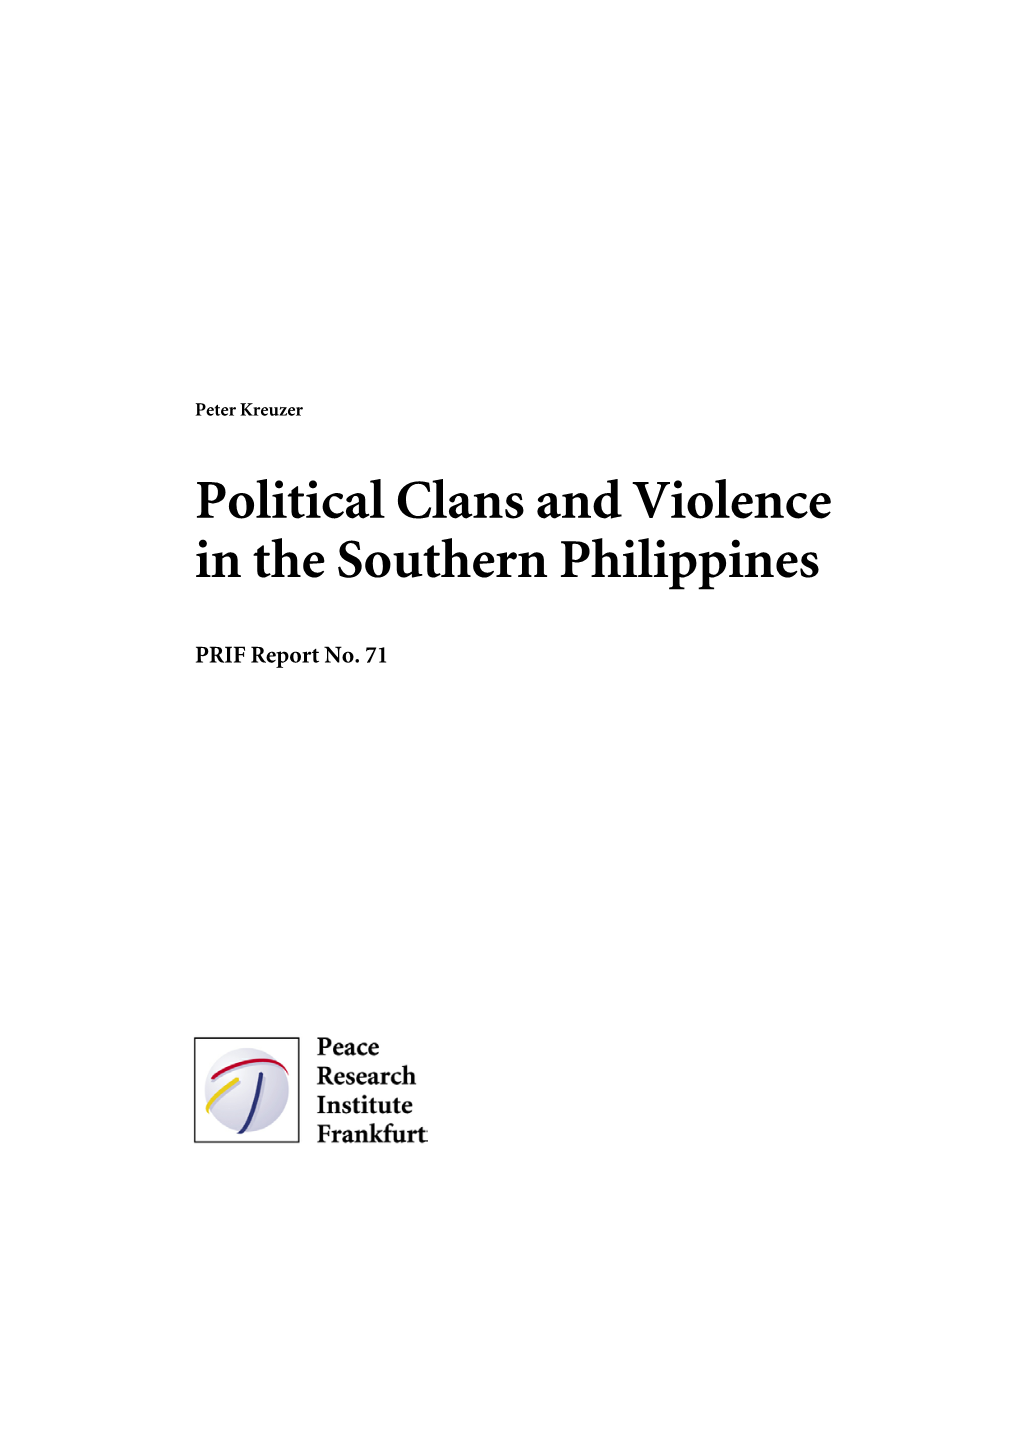 Political Clans and Violence in the Southern Philippines